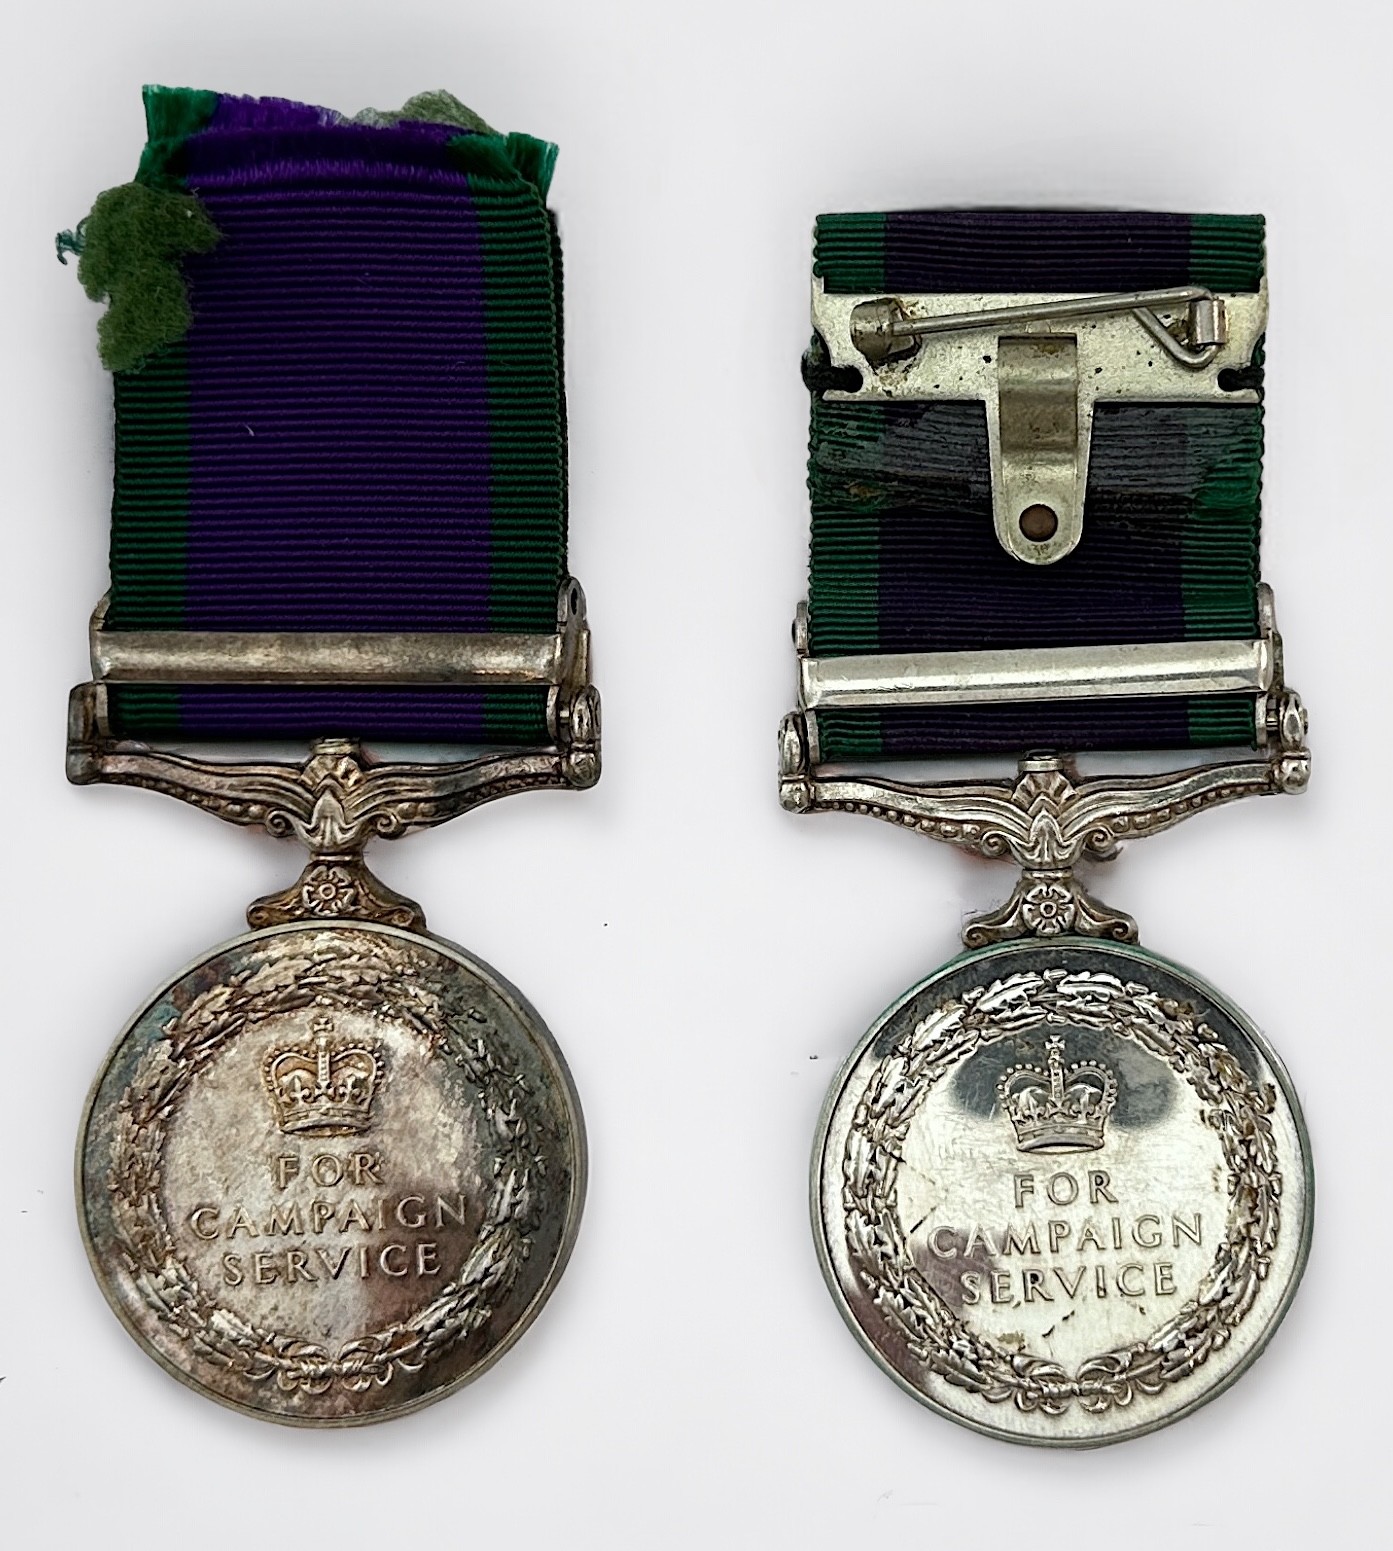 Two Elizabeth II General Service Medals with Norther Ireland Clasps, to 074563 J.P.G. BRIDGEMAN AB - Image 2 of 2